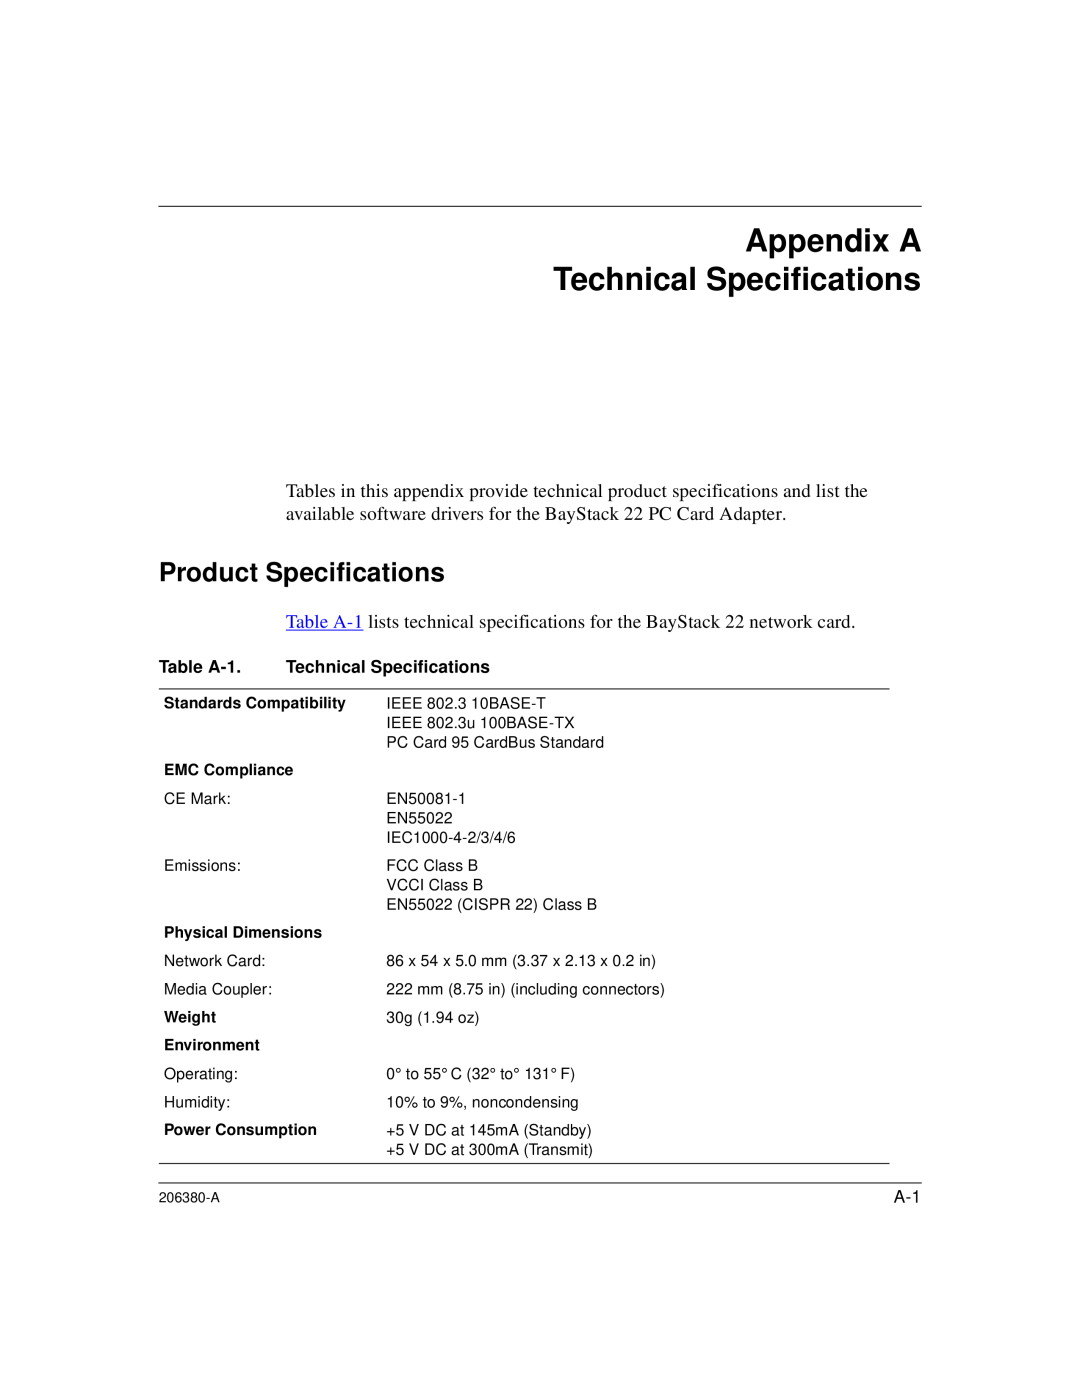 3Com 206380-A manual Appendix A Technical Specifications, Product Specifications 